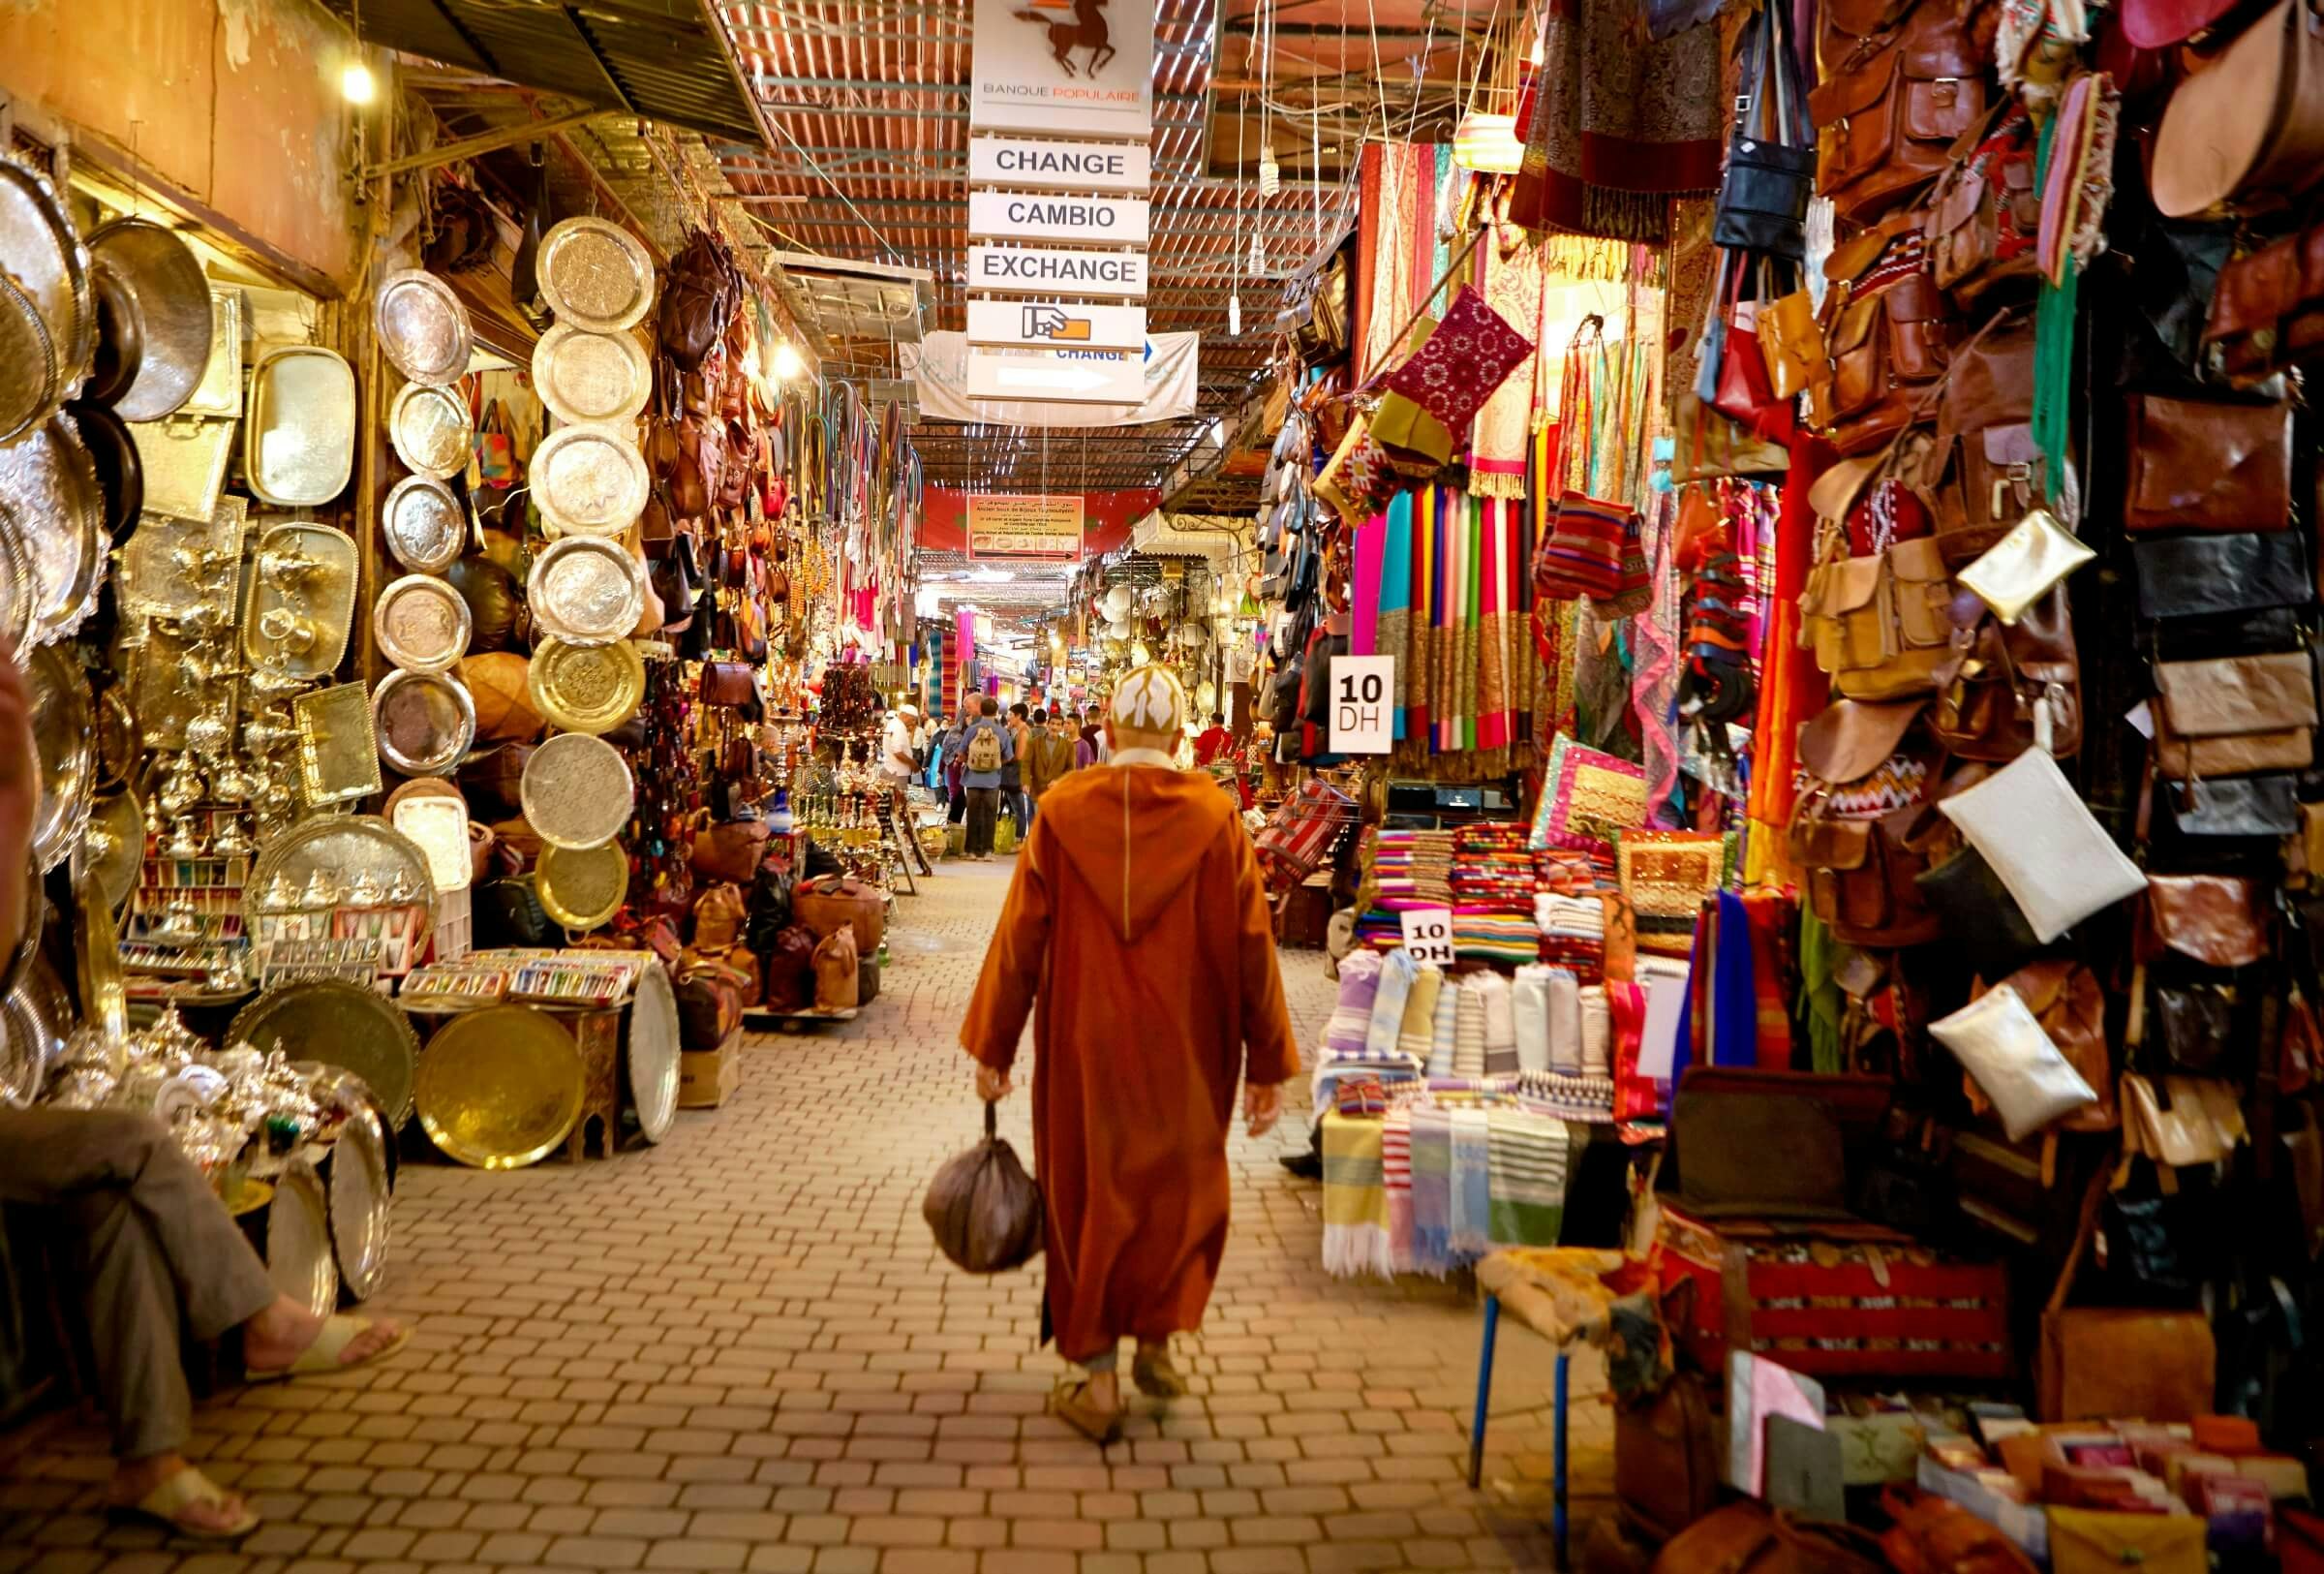 A man in traditional Moroccan robe called a Djellabah walks away from the camera. Stalls selling plates, bags and scarves line either side.